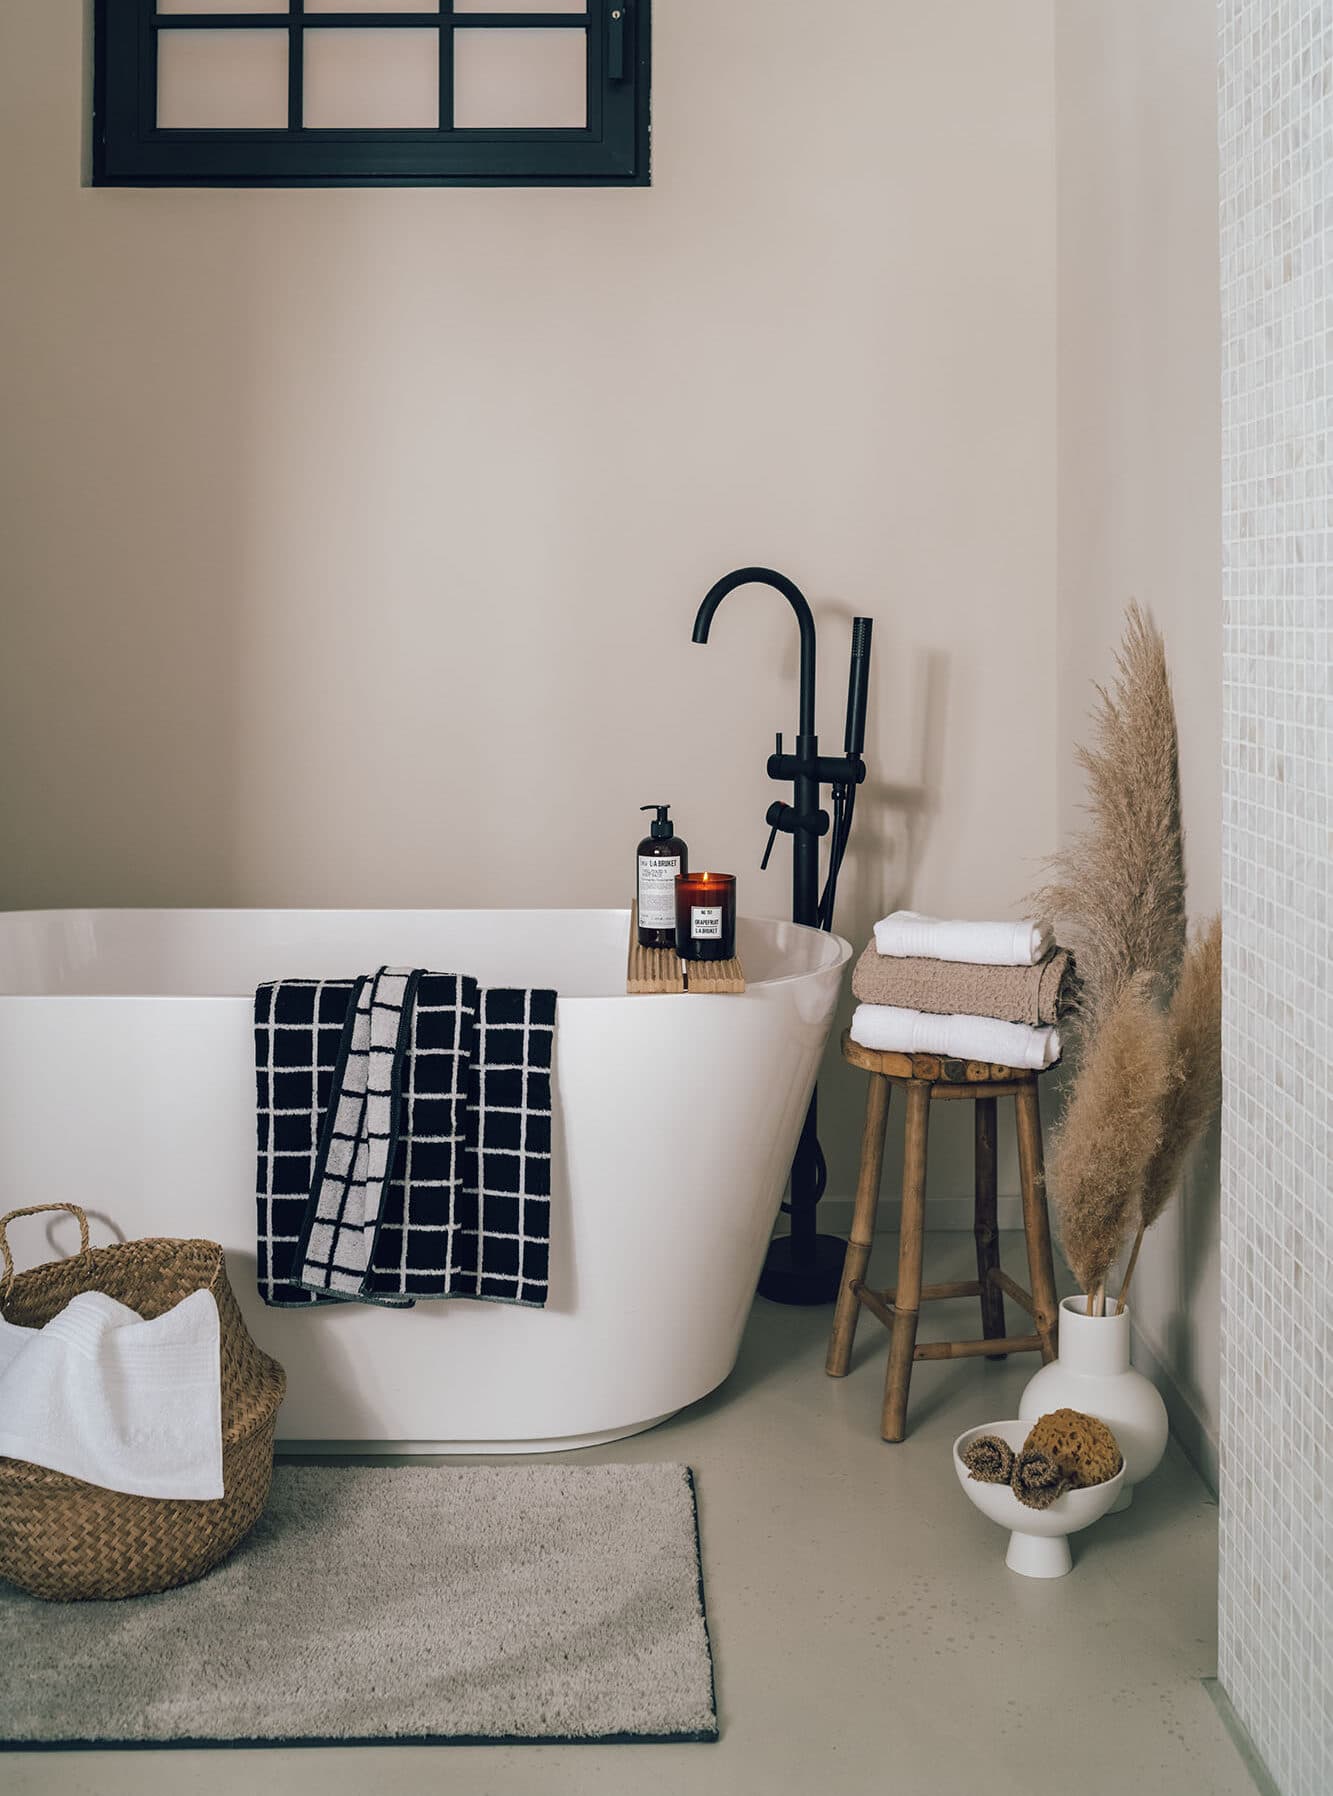 photography still life interior white free standing bathtub high black faucet black and white towels wood stool white and beige towels beige carpet